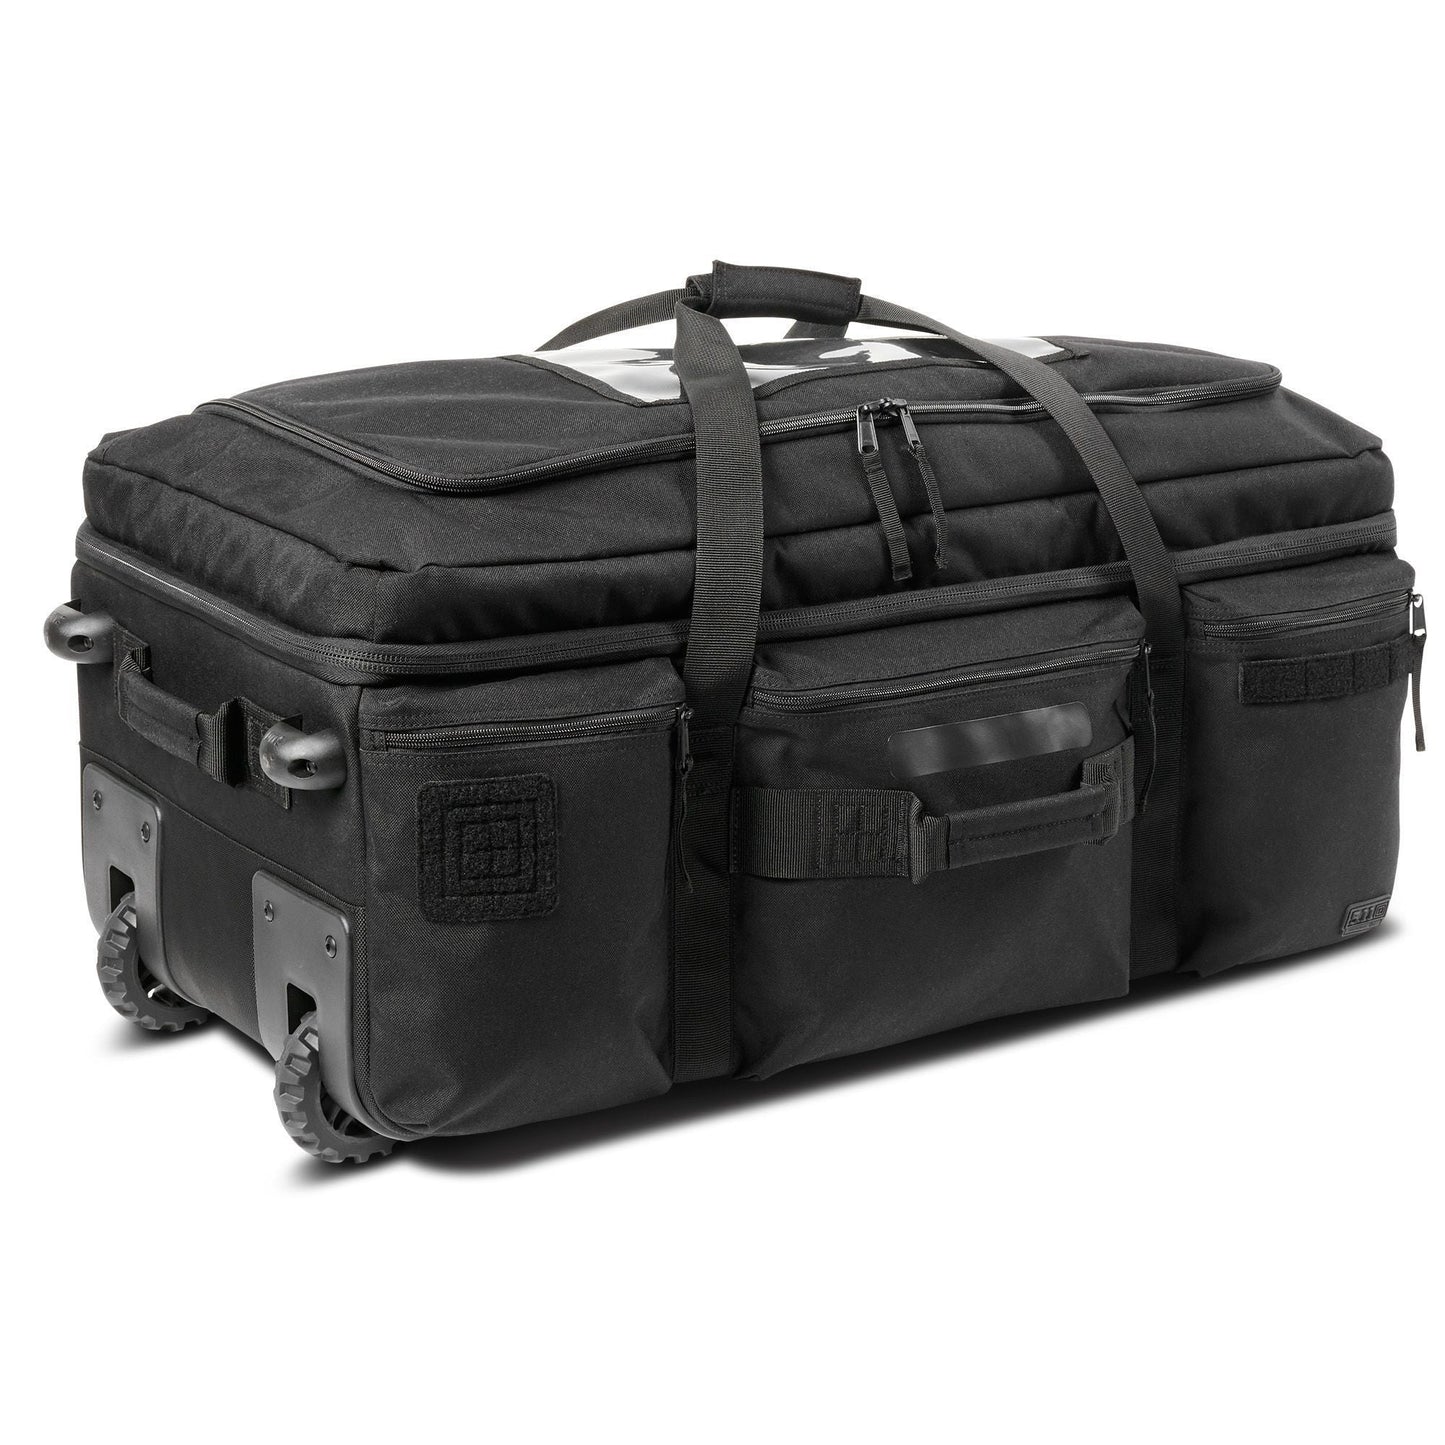 5.11 Tactical Mission Ready 3.0 Bag